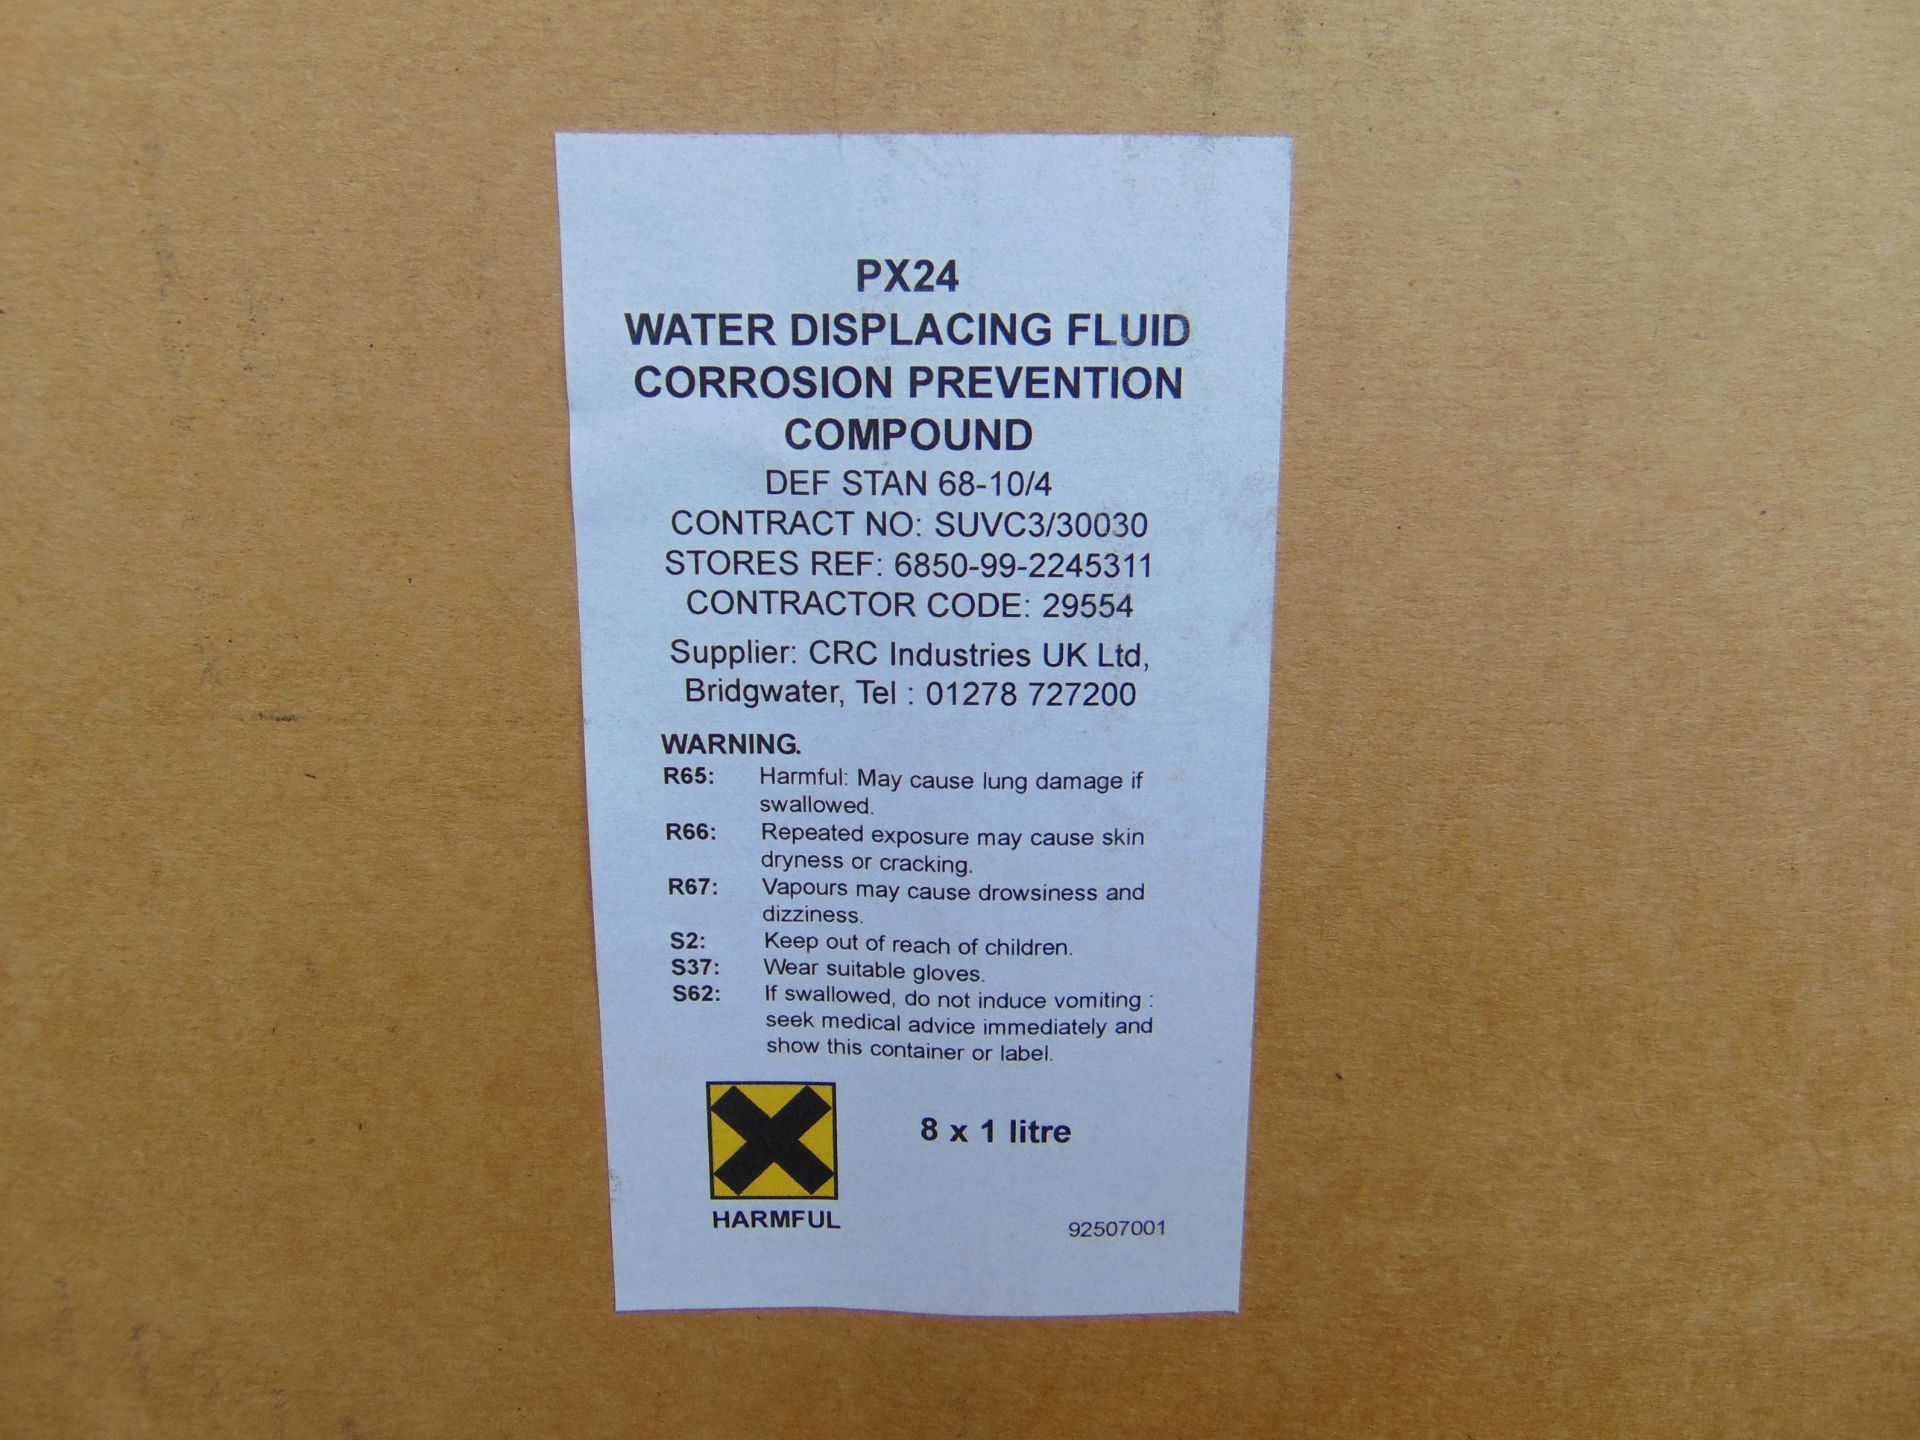 8 x 1 Ltr Bottles of PX24 Water Displacing Fluid Corrosion Prevention Compound - Image 5 of 6